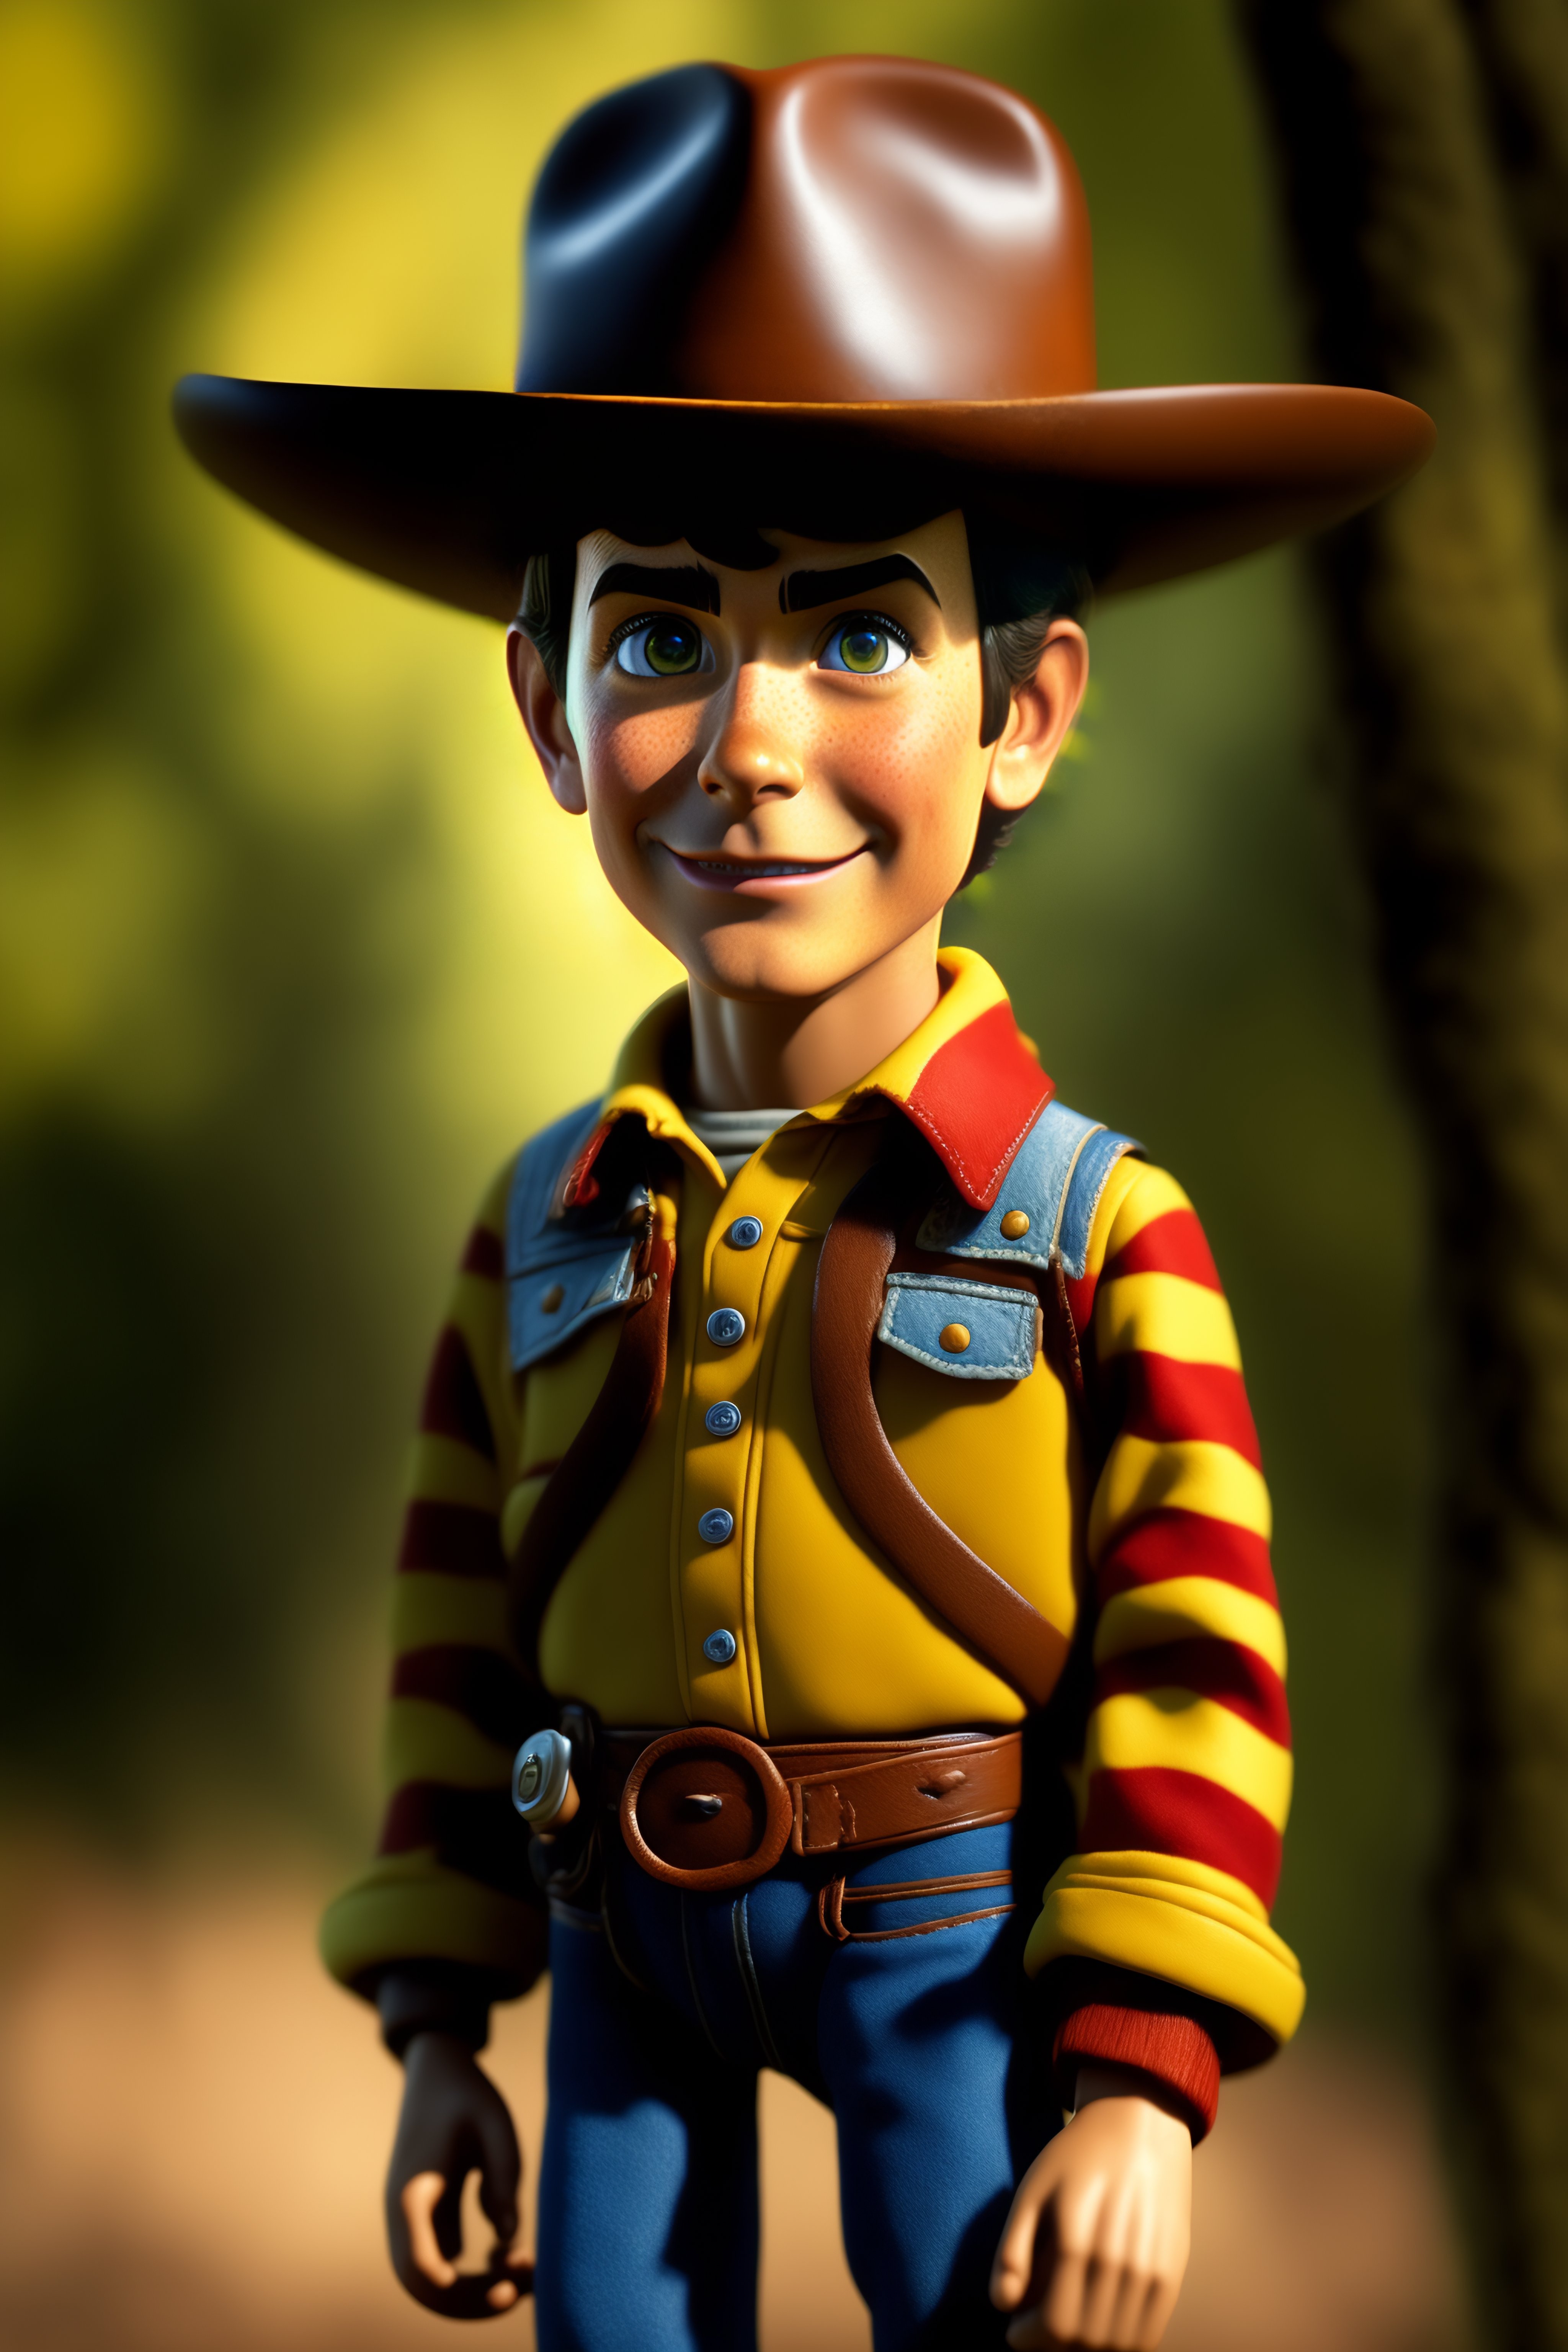 Lexica - Real life Woody from Toy Story, photorealistic